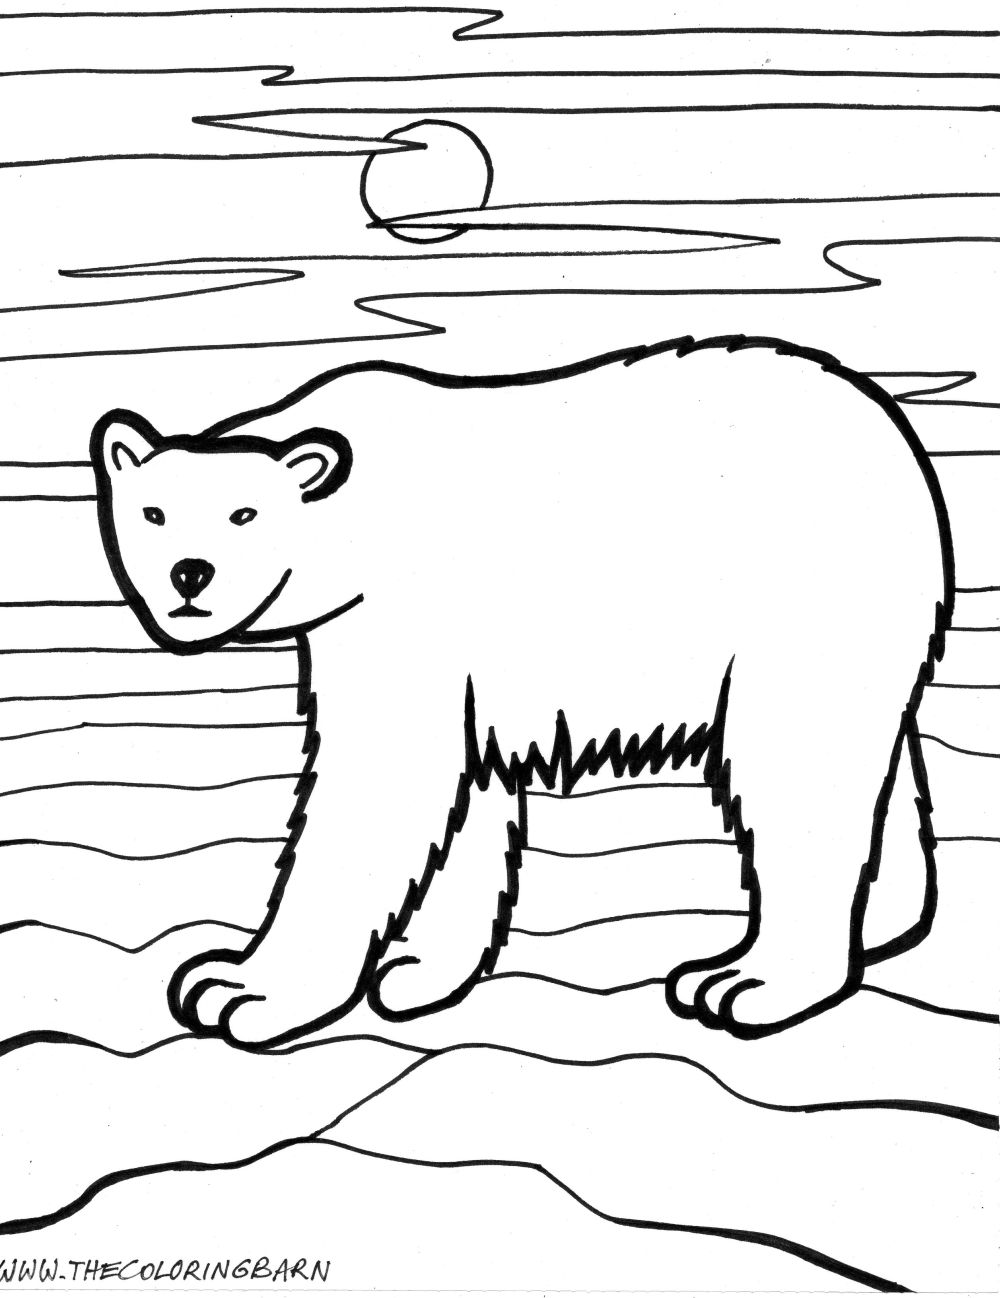 Download Free Coloring Pages Of Arctic Animals - High Quality Coloring Pages - Coloring Home